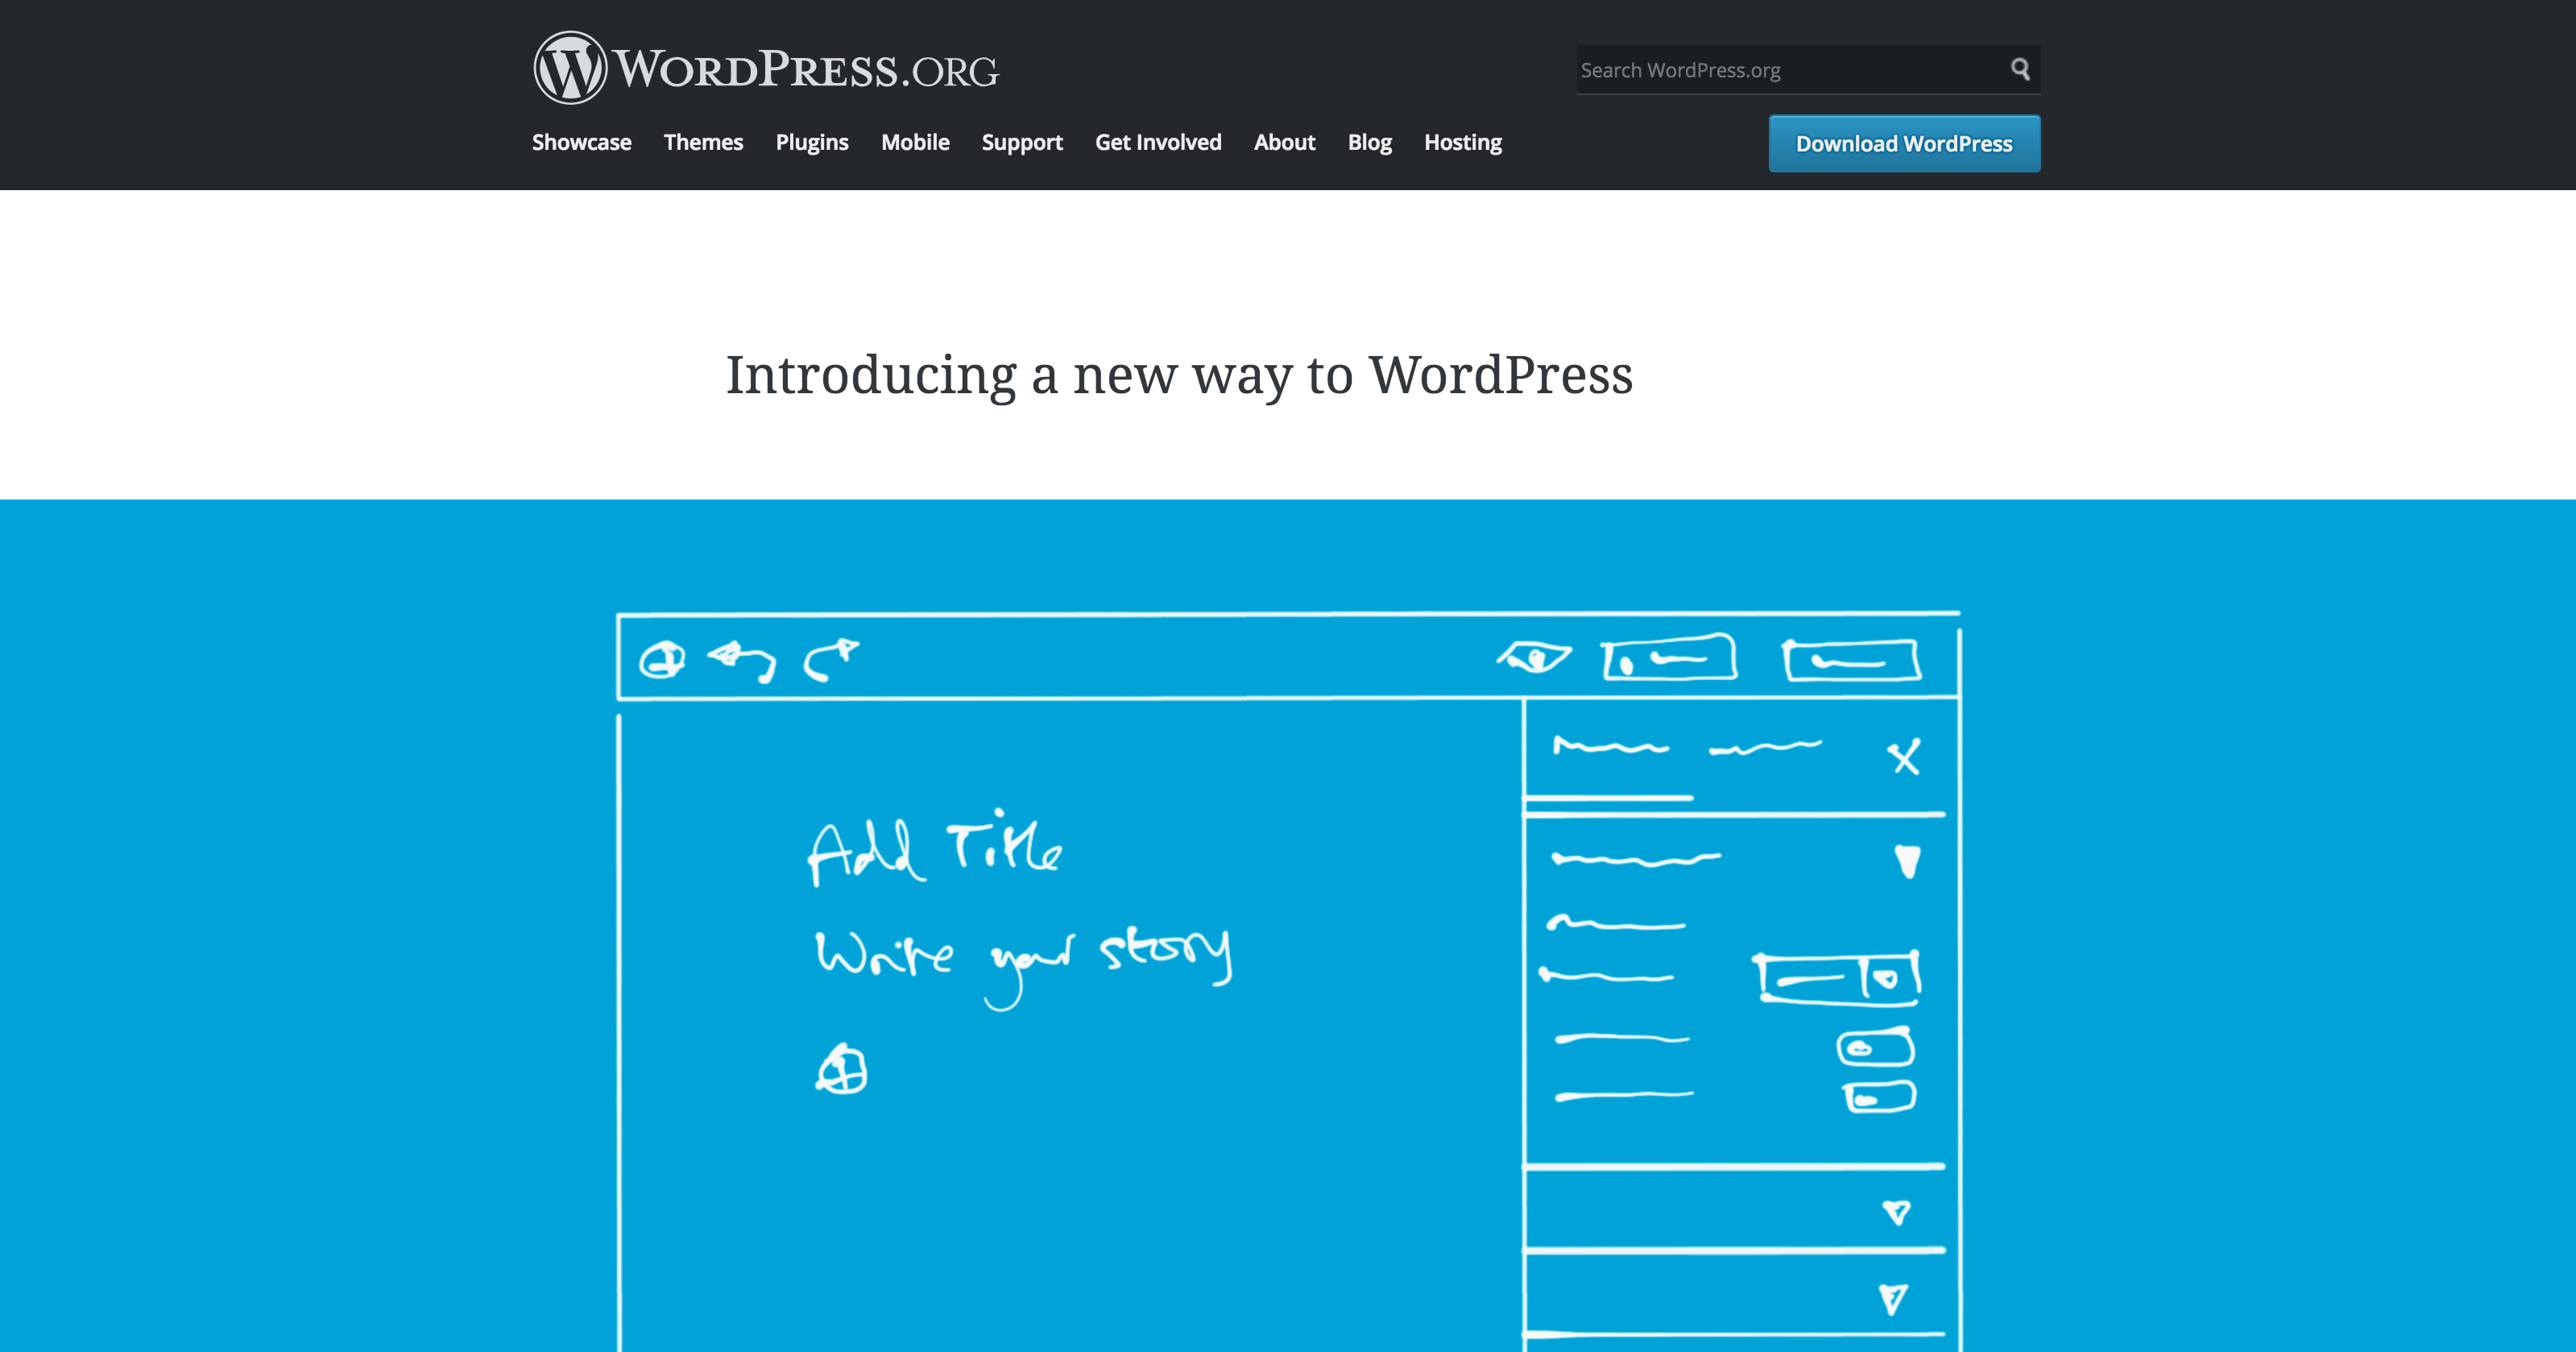 The home page for the Gutenberg project.